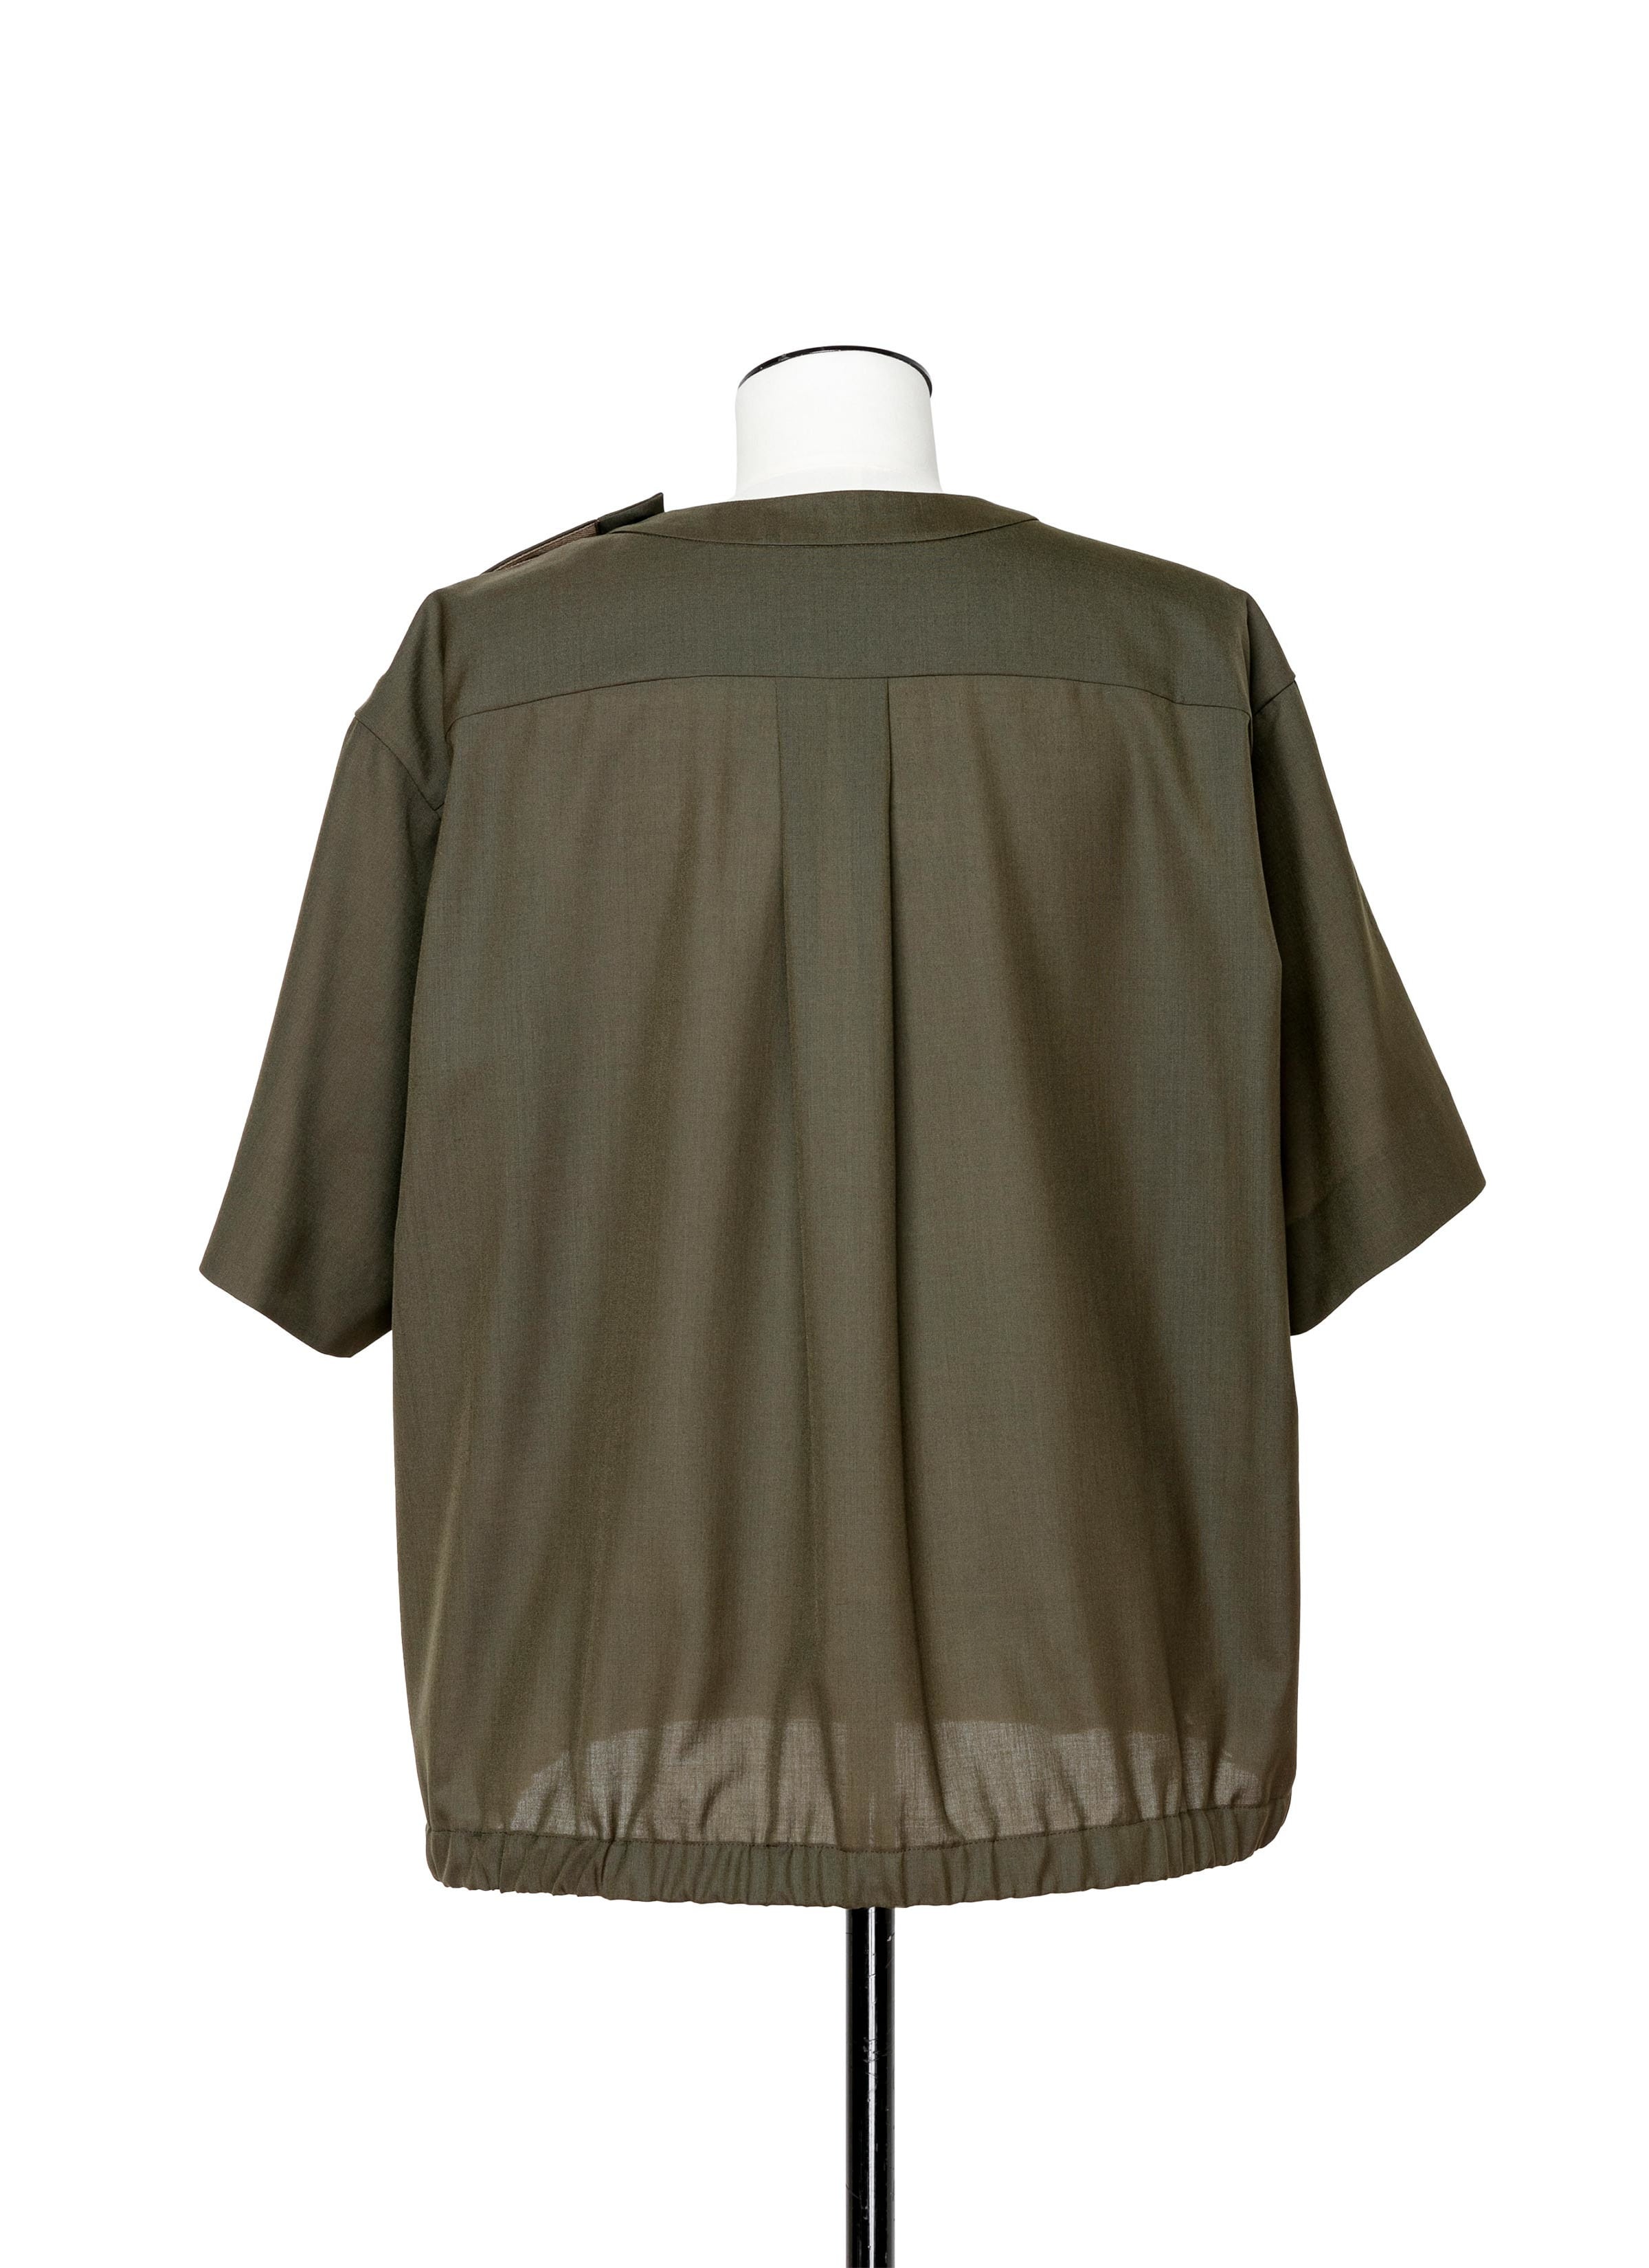 Suiting Mix Pullover 詳細画像 KHAKI 3